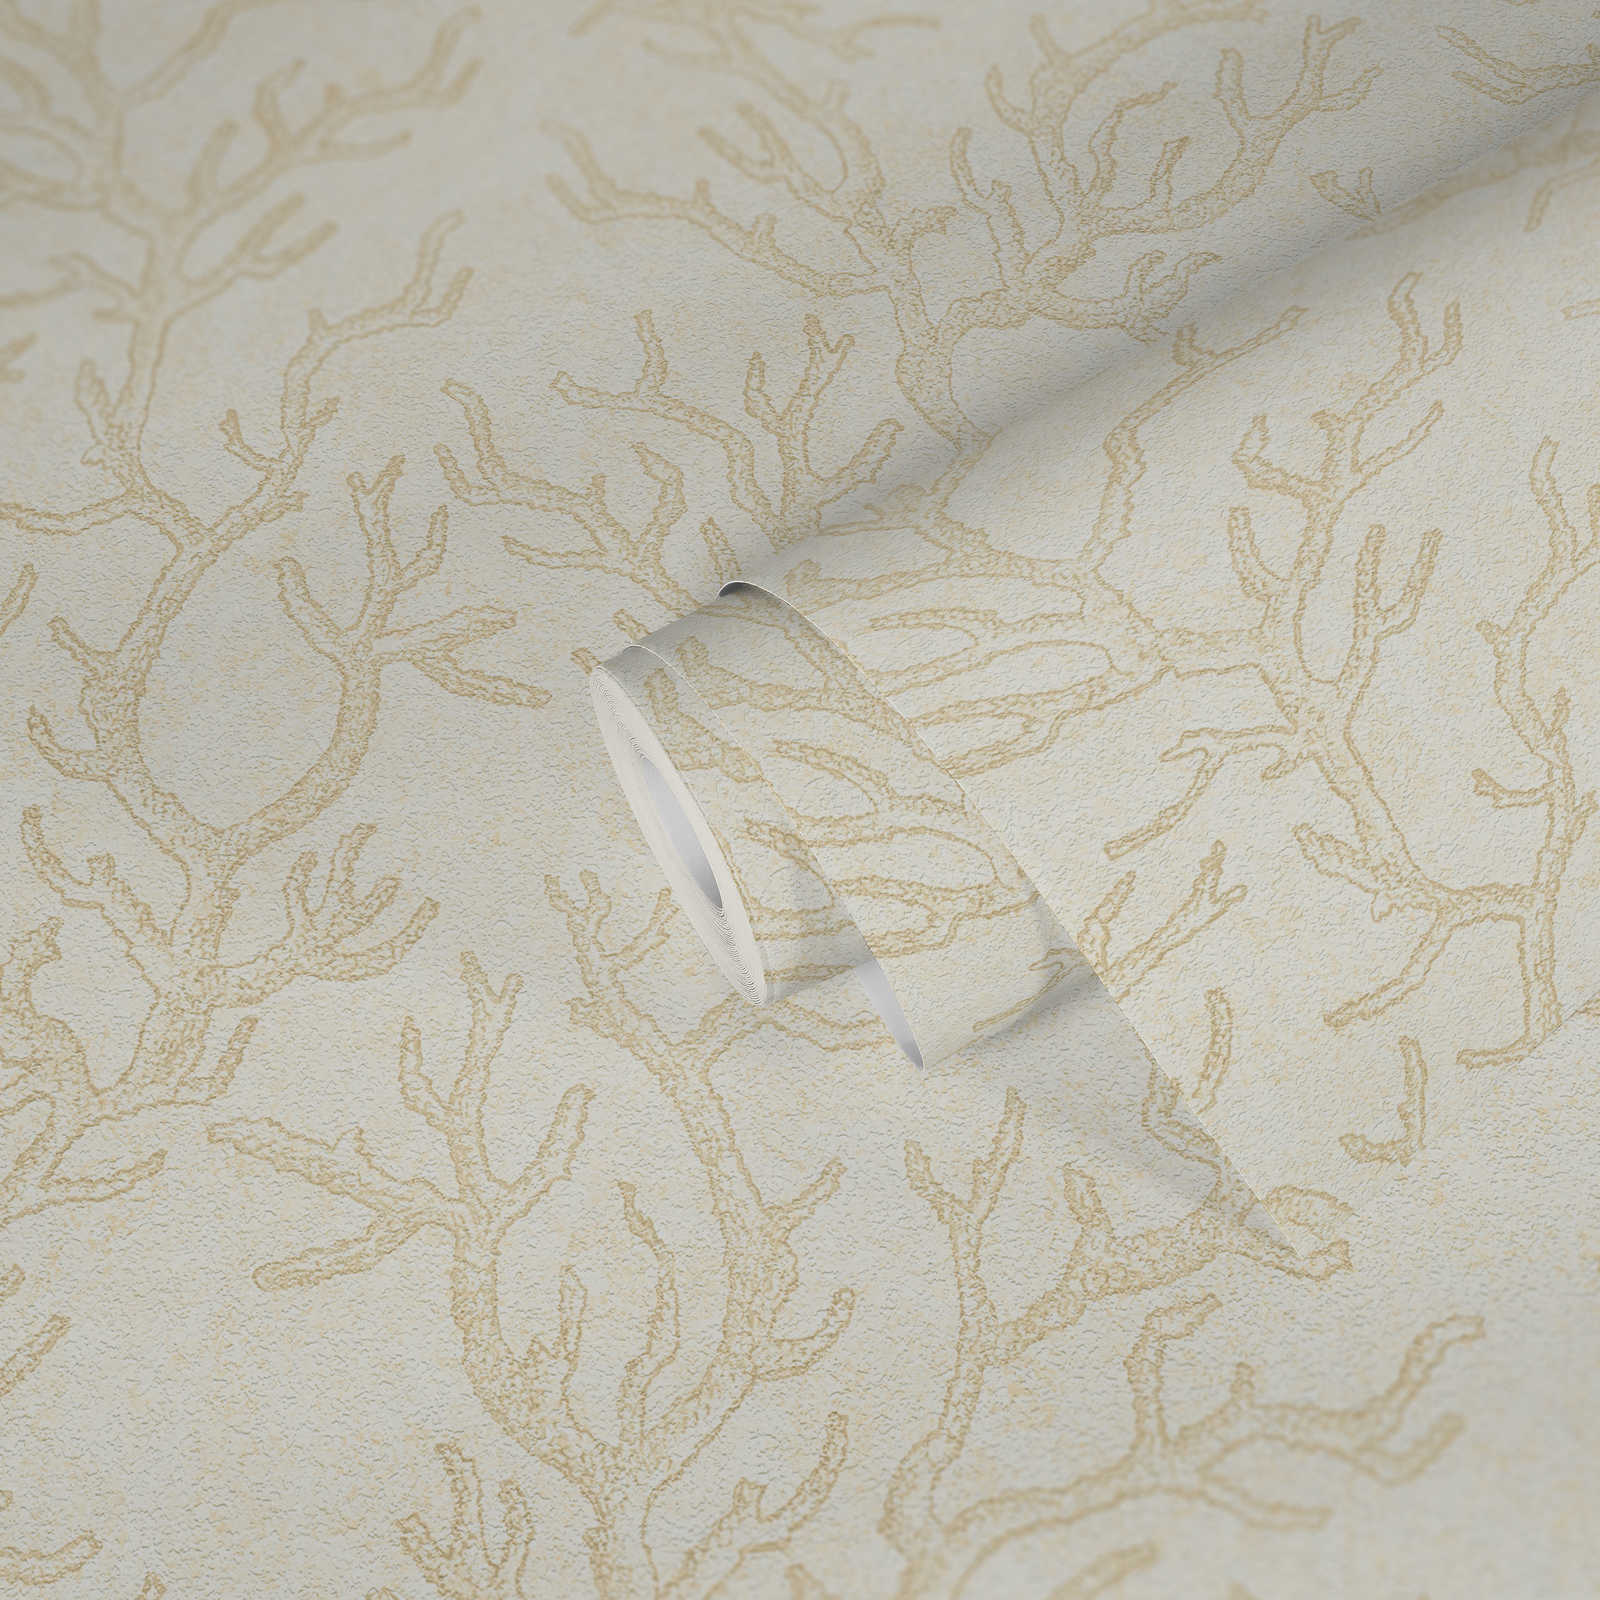             VERSACE wallpaper with coral & gold effect - cream, metallic
        